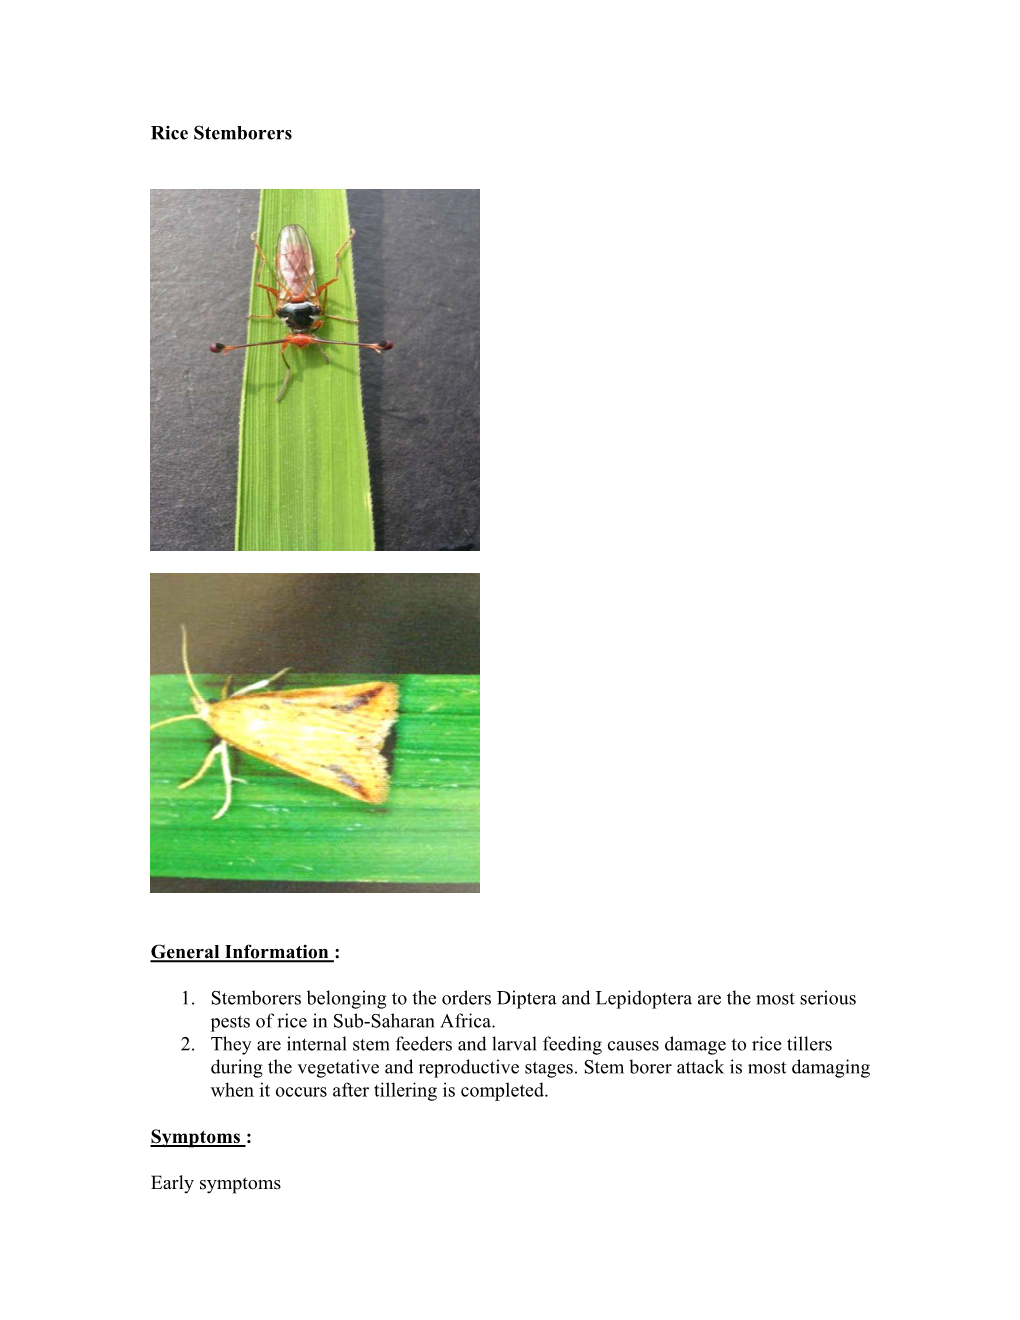 Rice Insect Guide